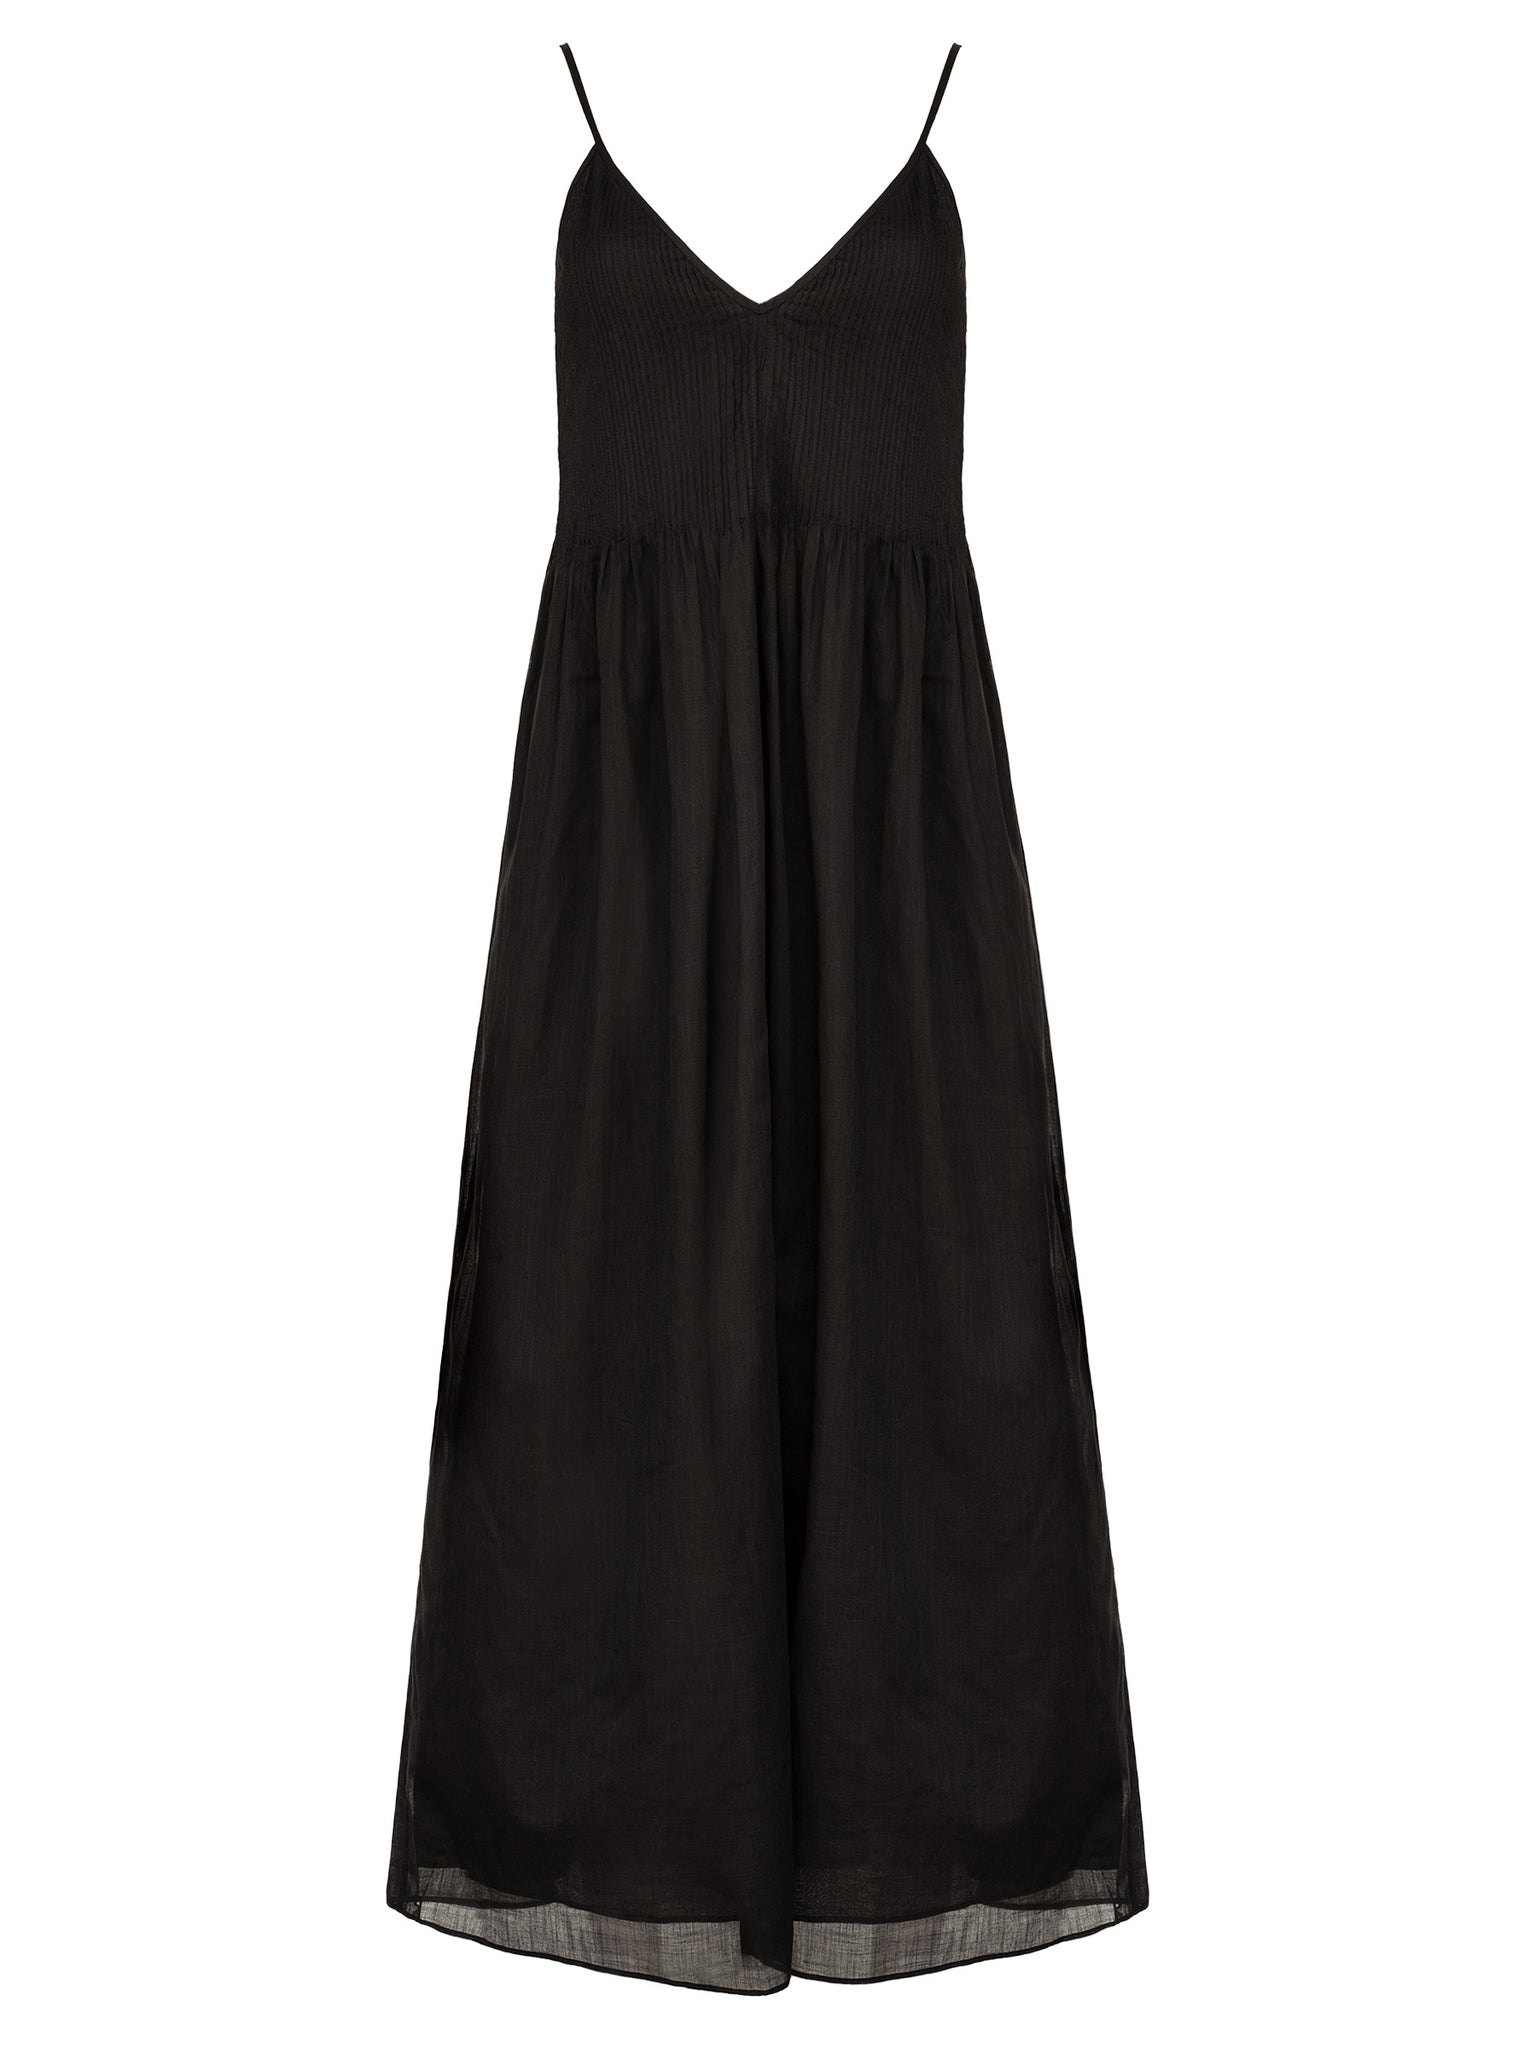 Sir The Label | Alina V Neck Dress in Black | The UNDONE by SIR.